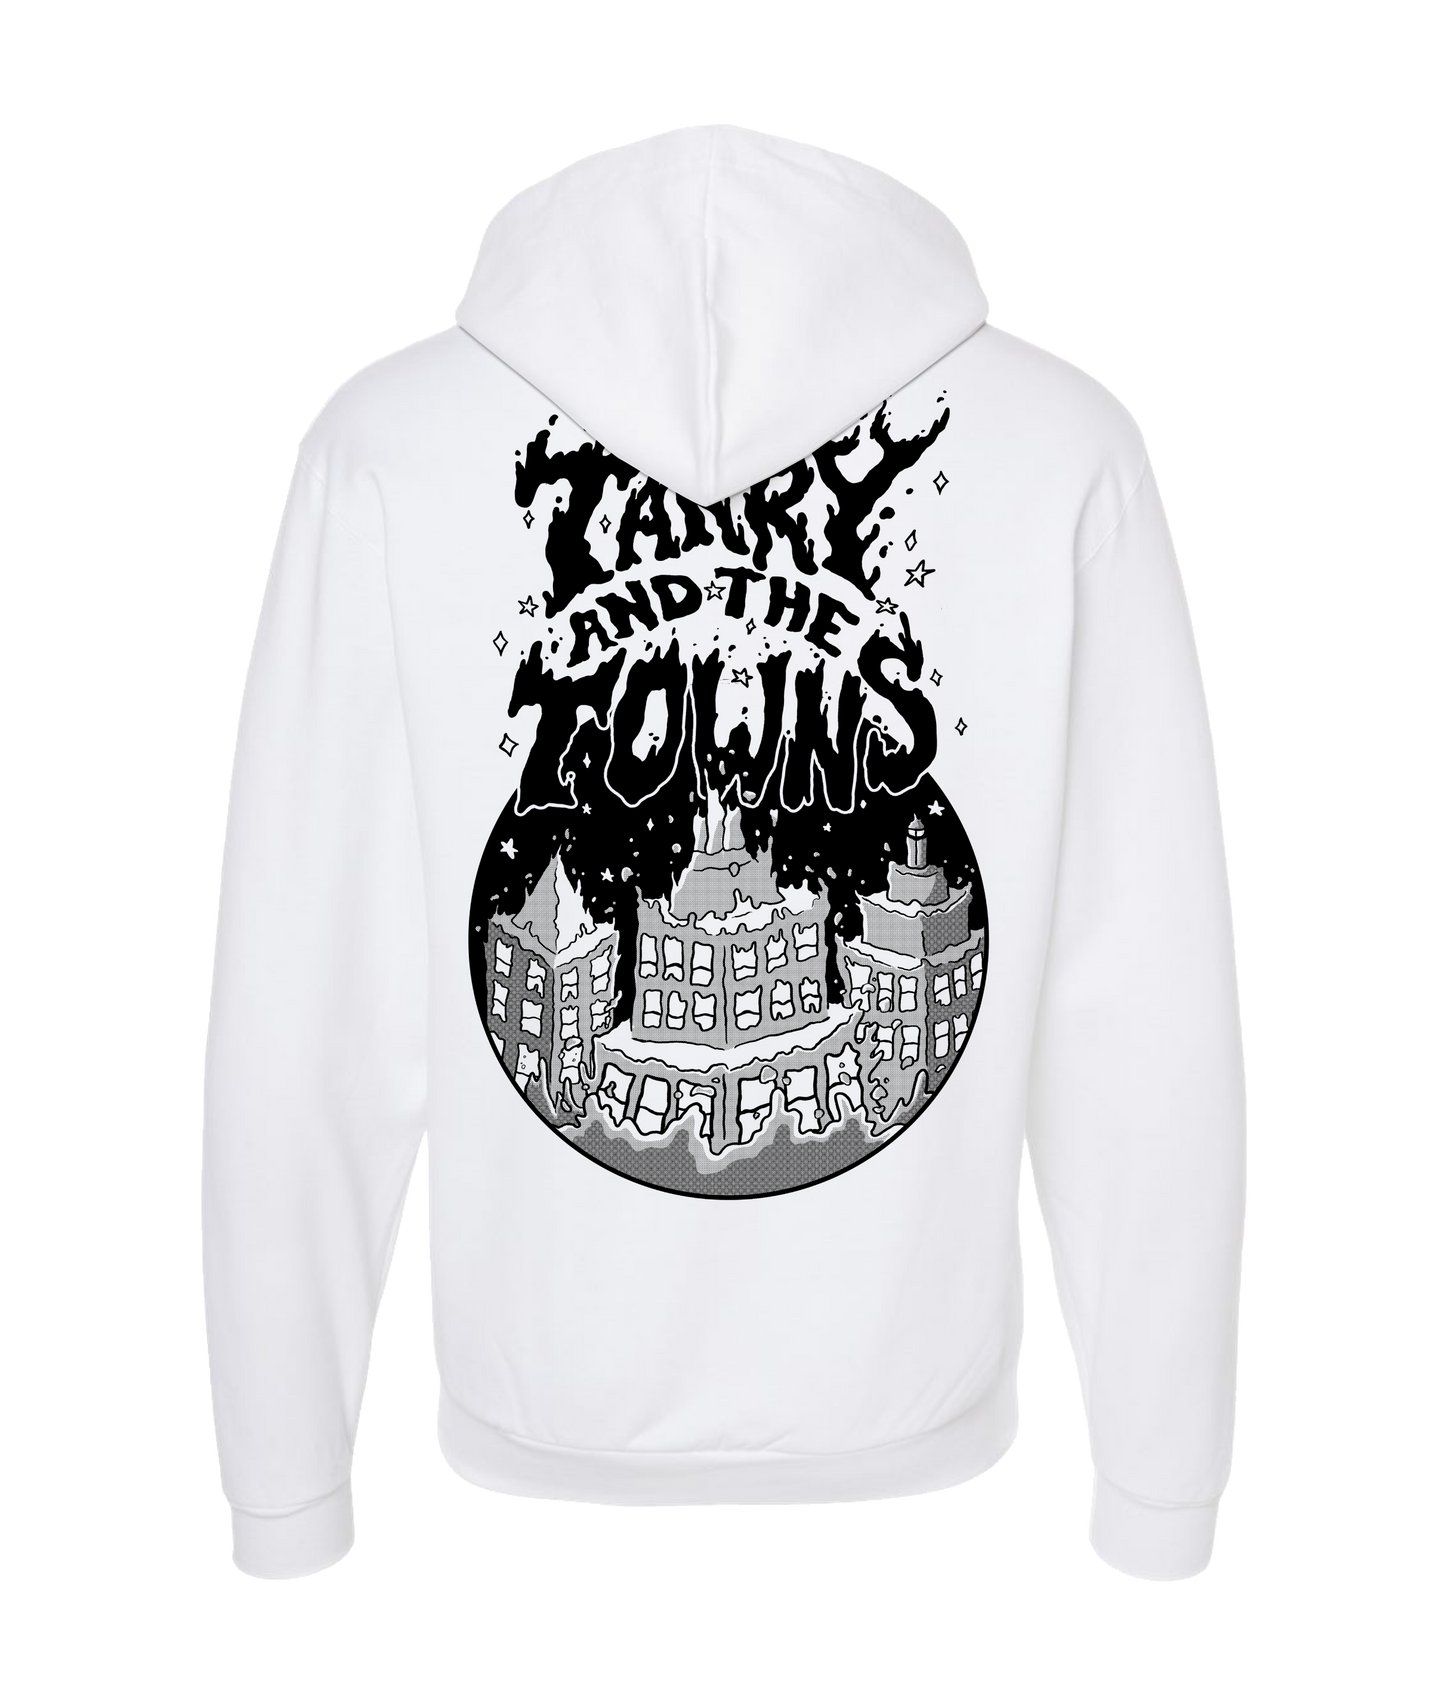 Tarry and the Towns - Inky - White Zip Up Hoodie